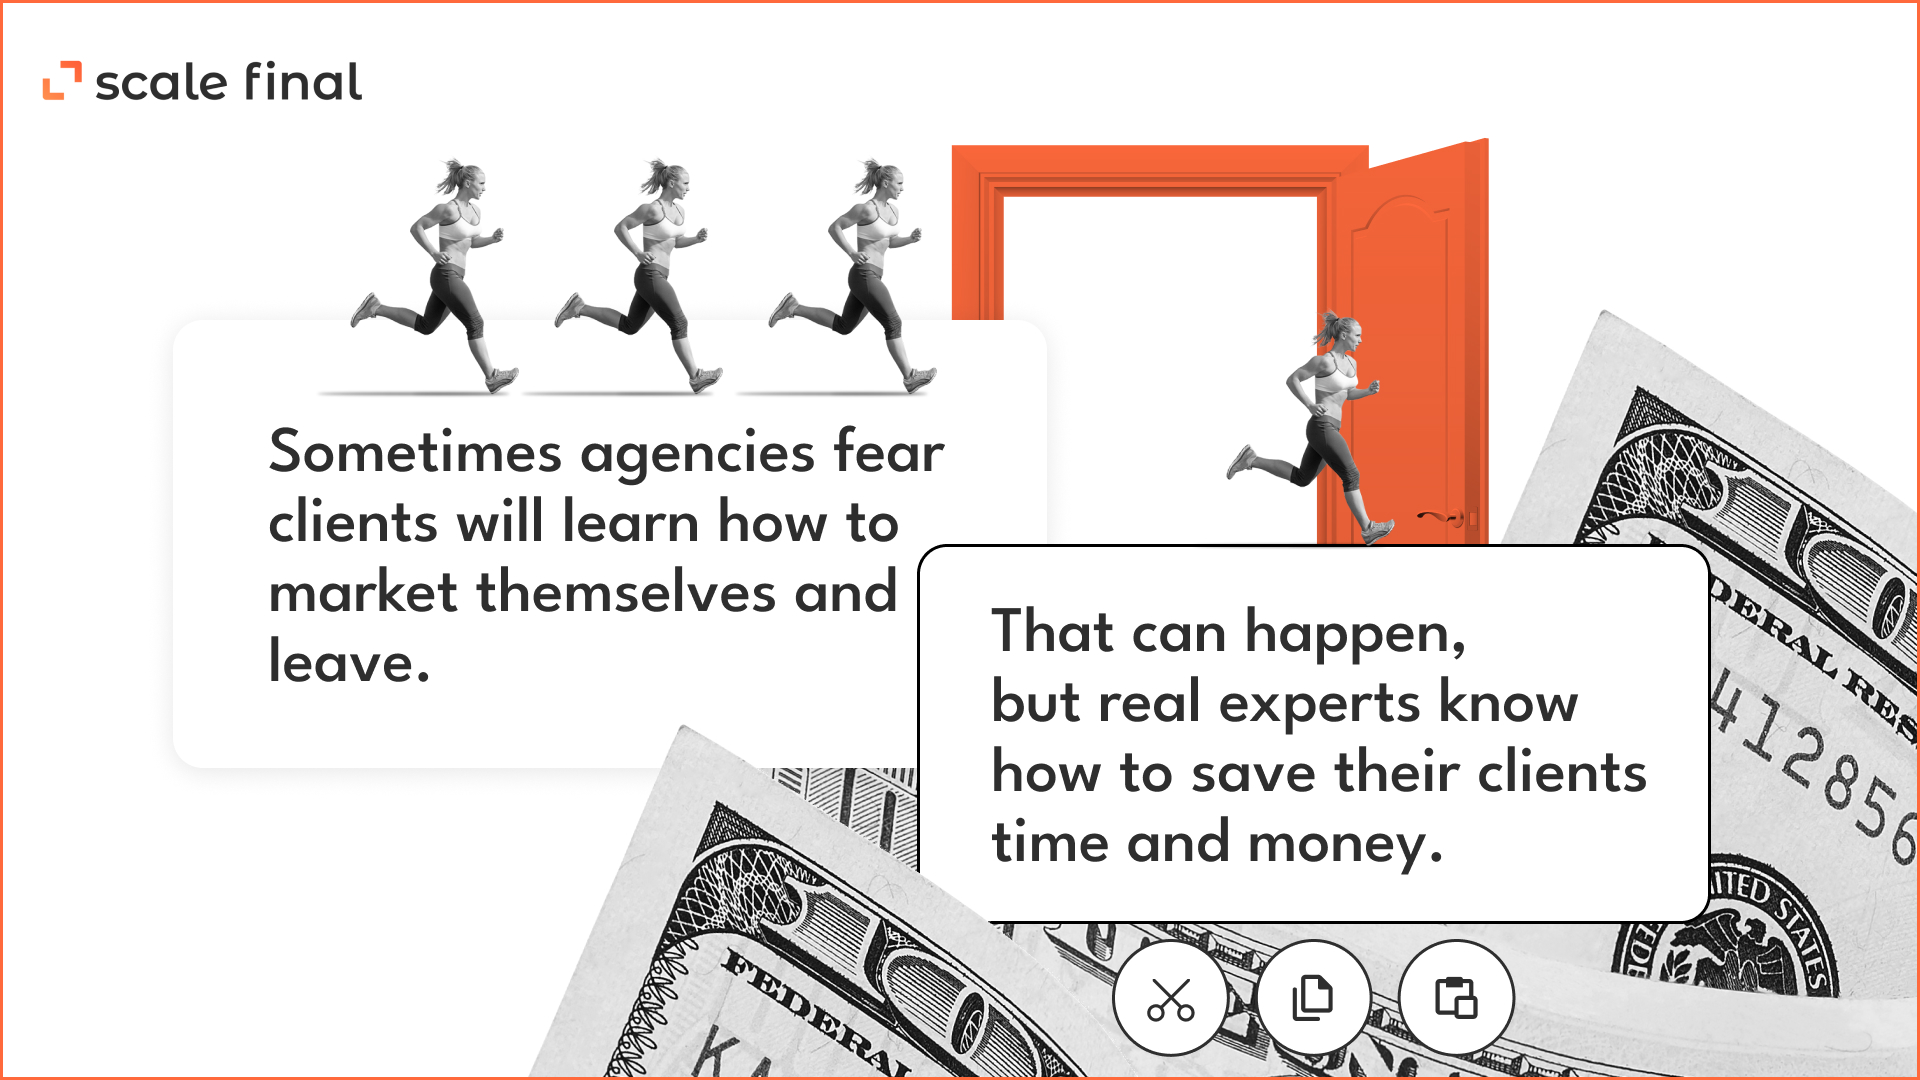 Sometimes agencies fear clients will learn how to market themselves and leave. That can happen, but real experts know how to save their clients time and money.